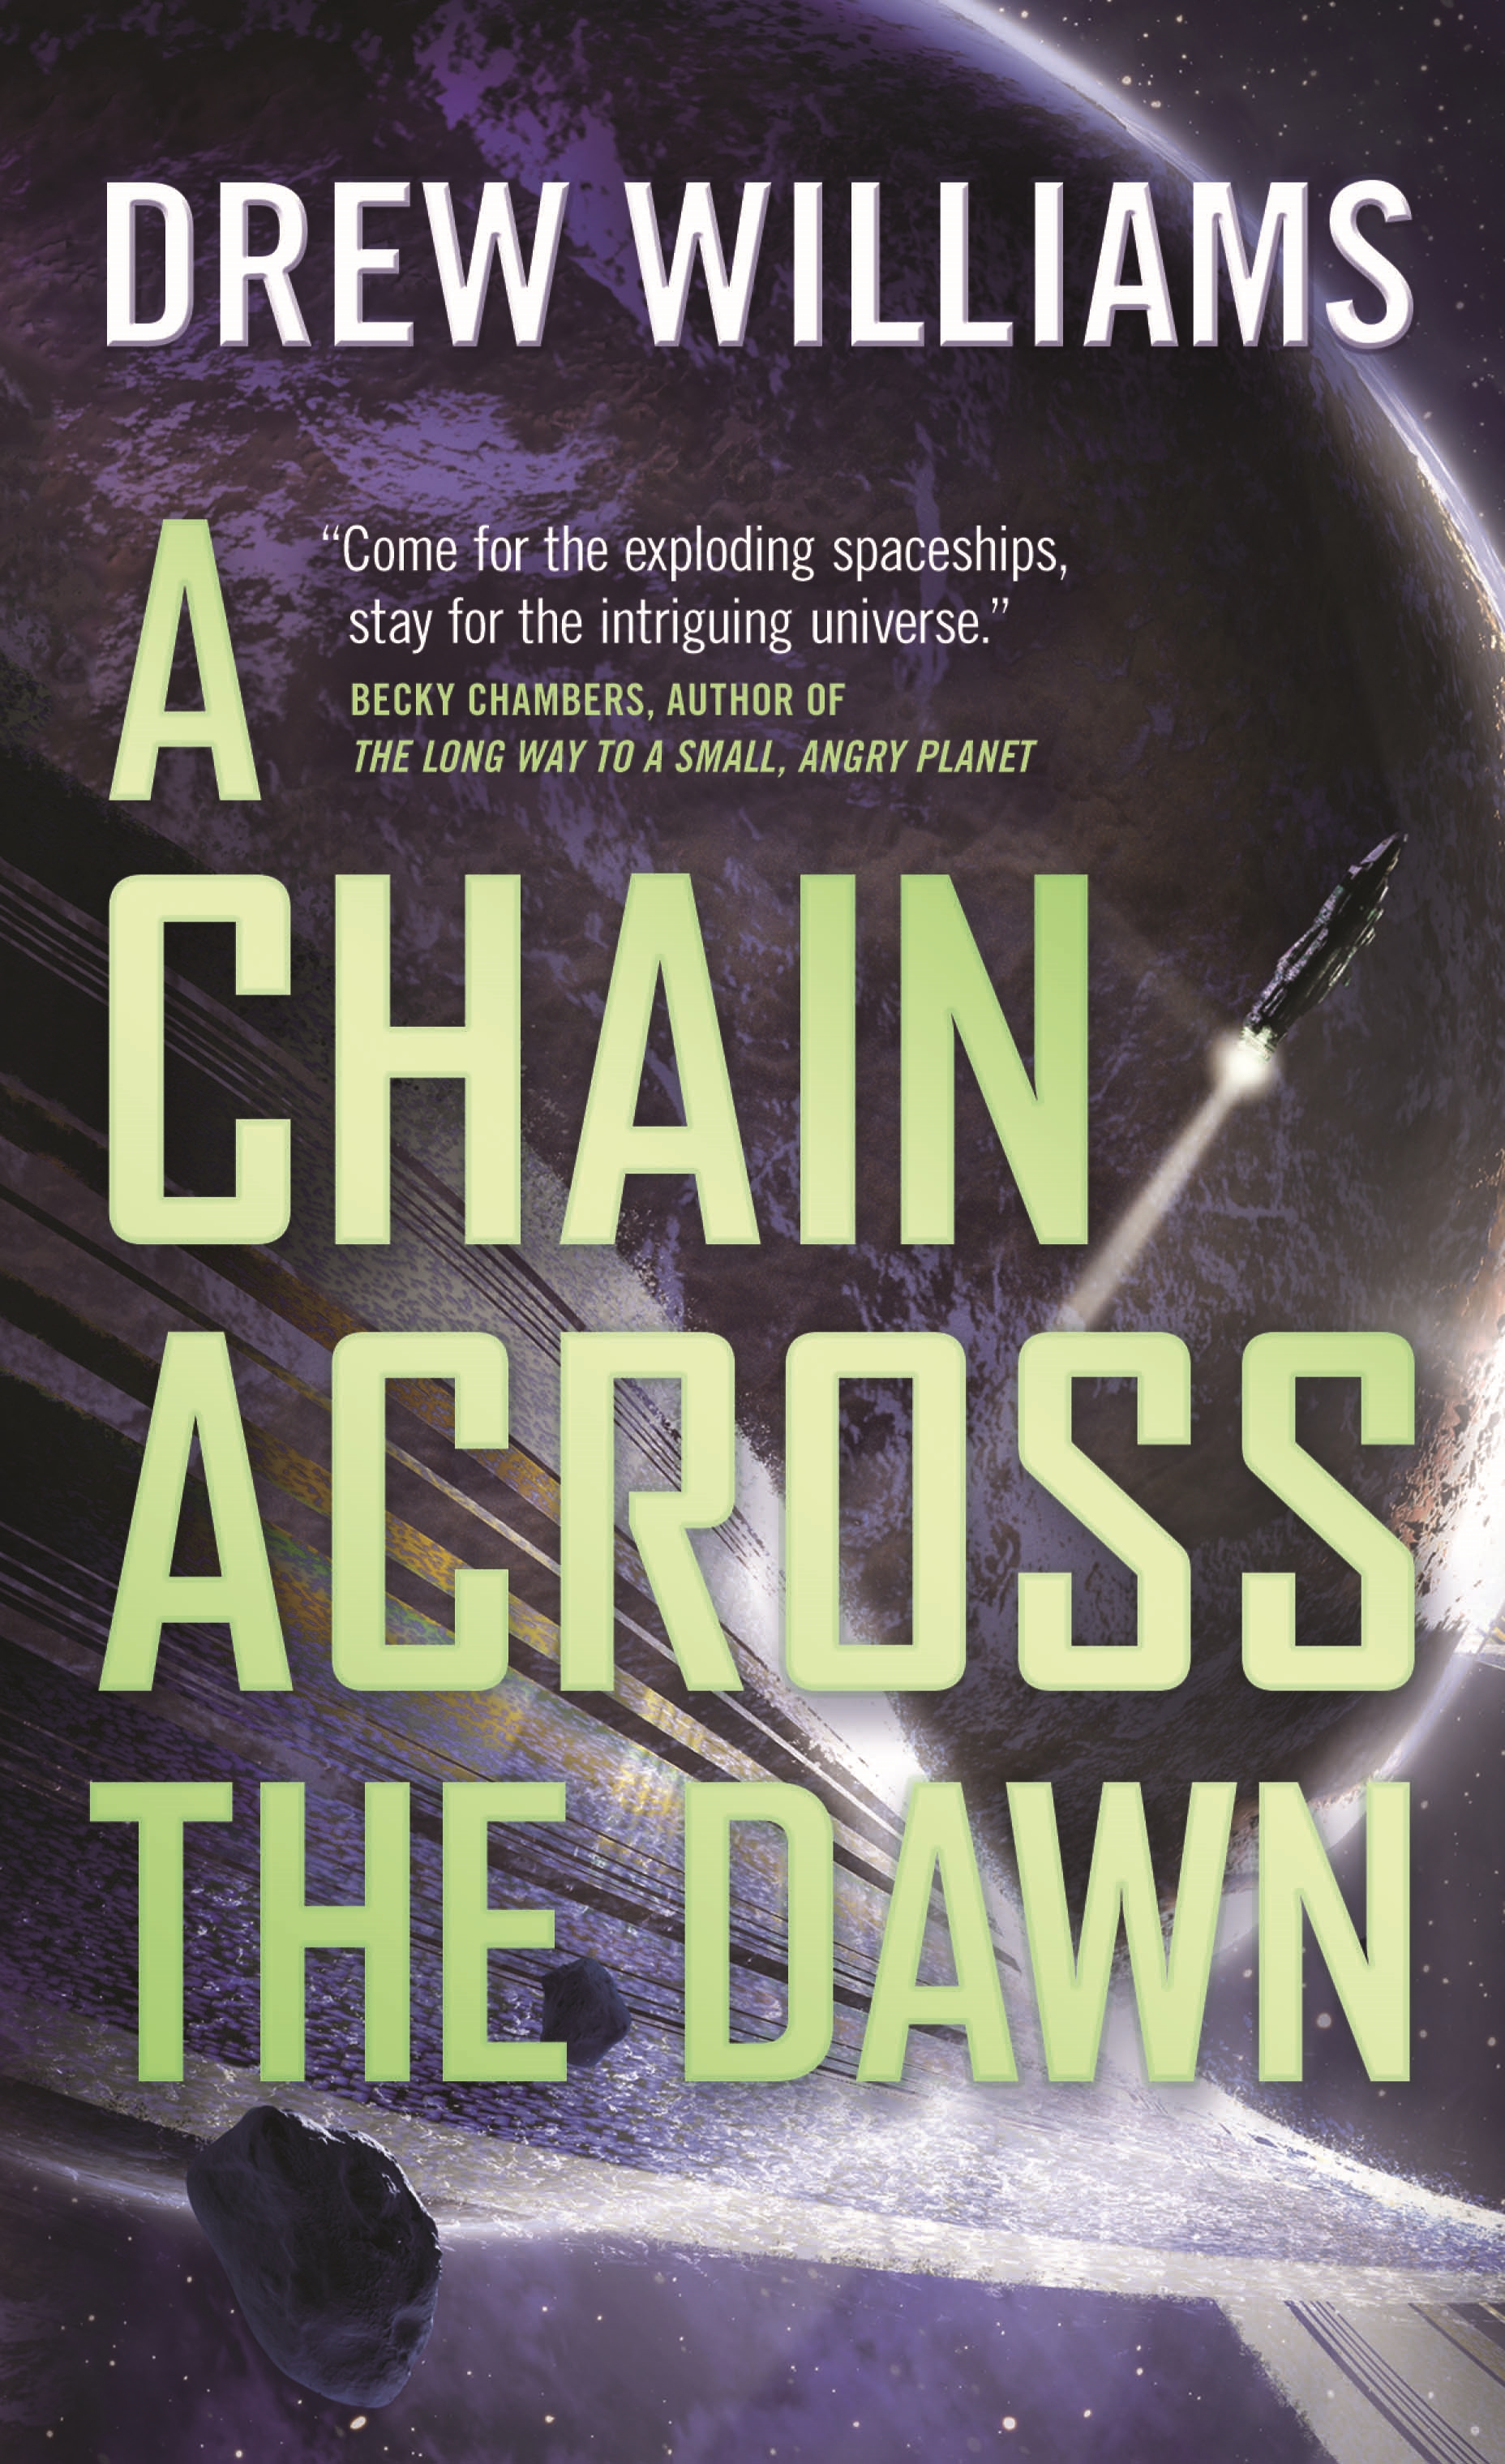 A Chain Across the Dawn by Drew Williams